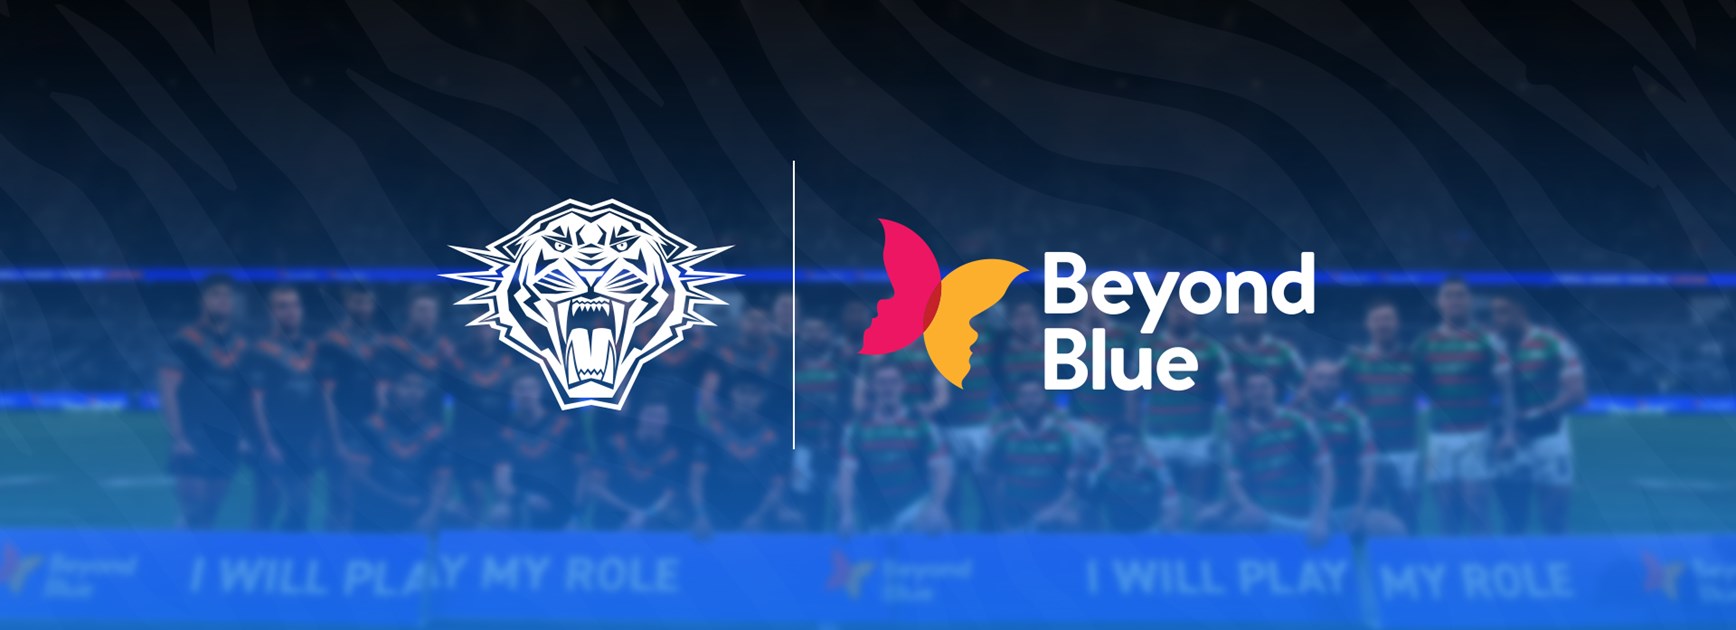 Beyond Blue and Wests Tigers call on NRL fans to ‘play their role’